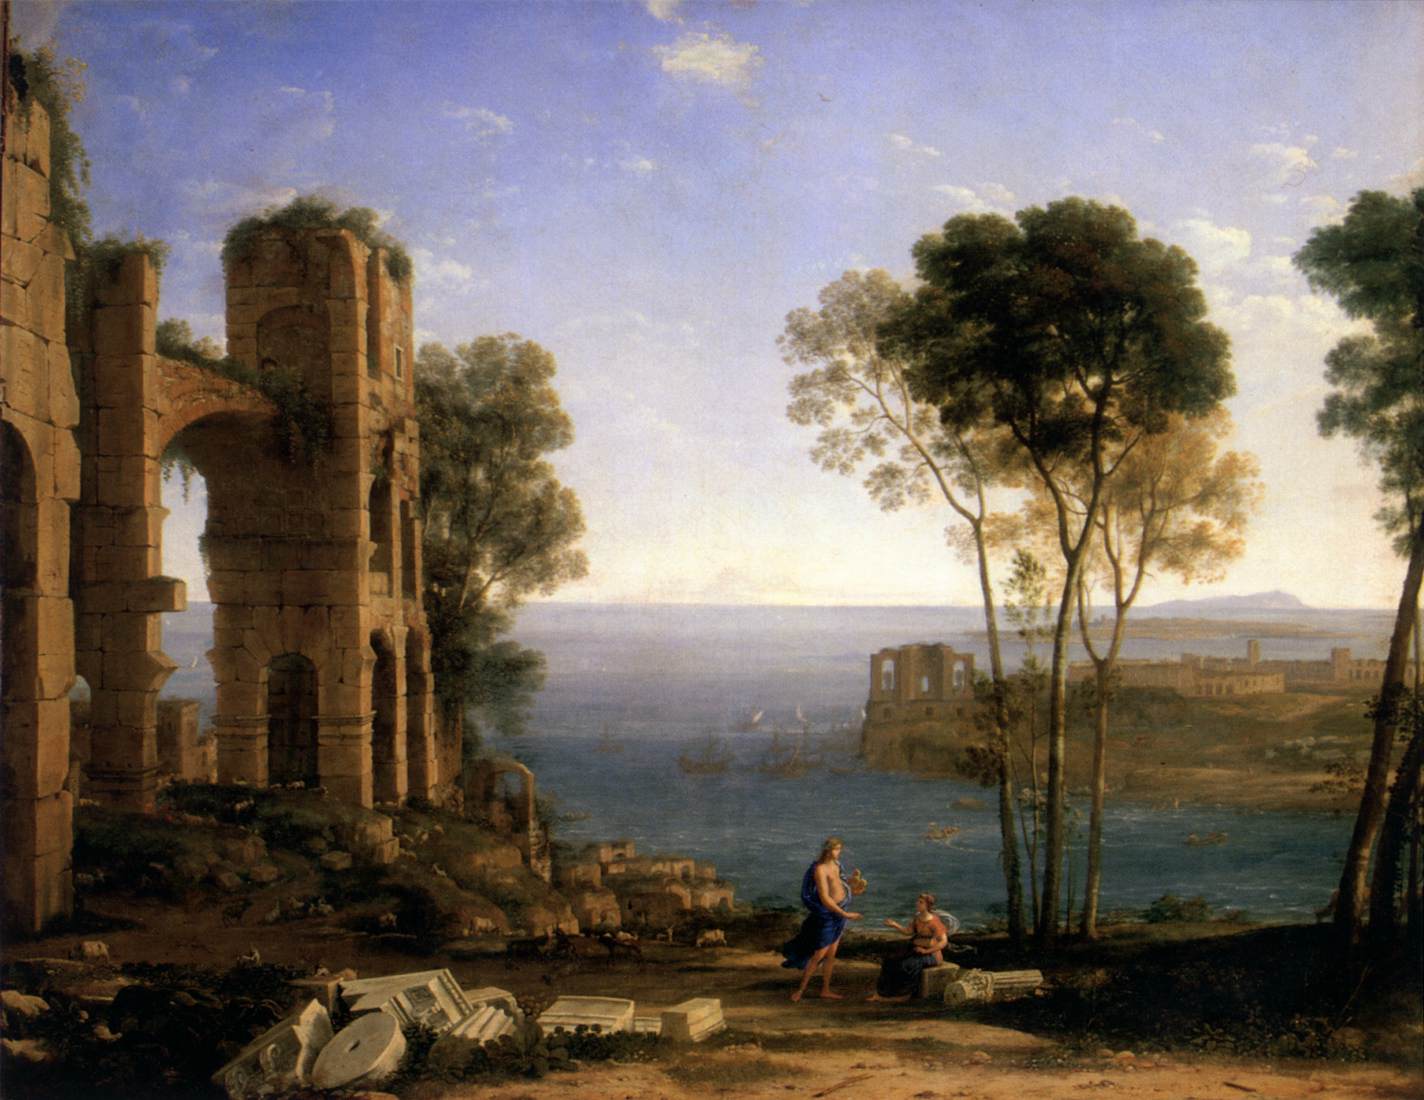 Landscape with Apollo and the Sibyl of Cumae